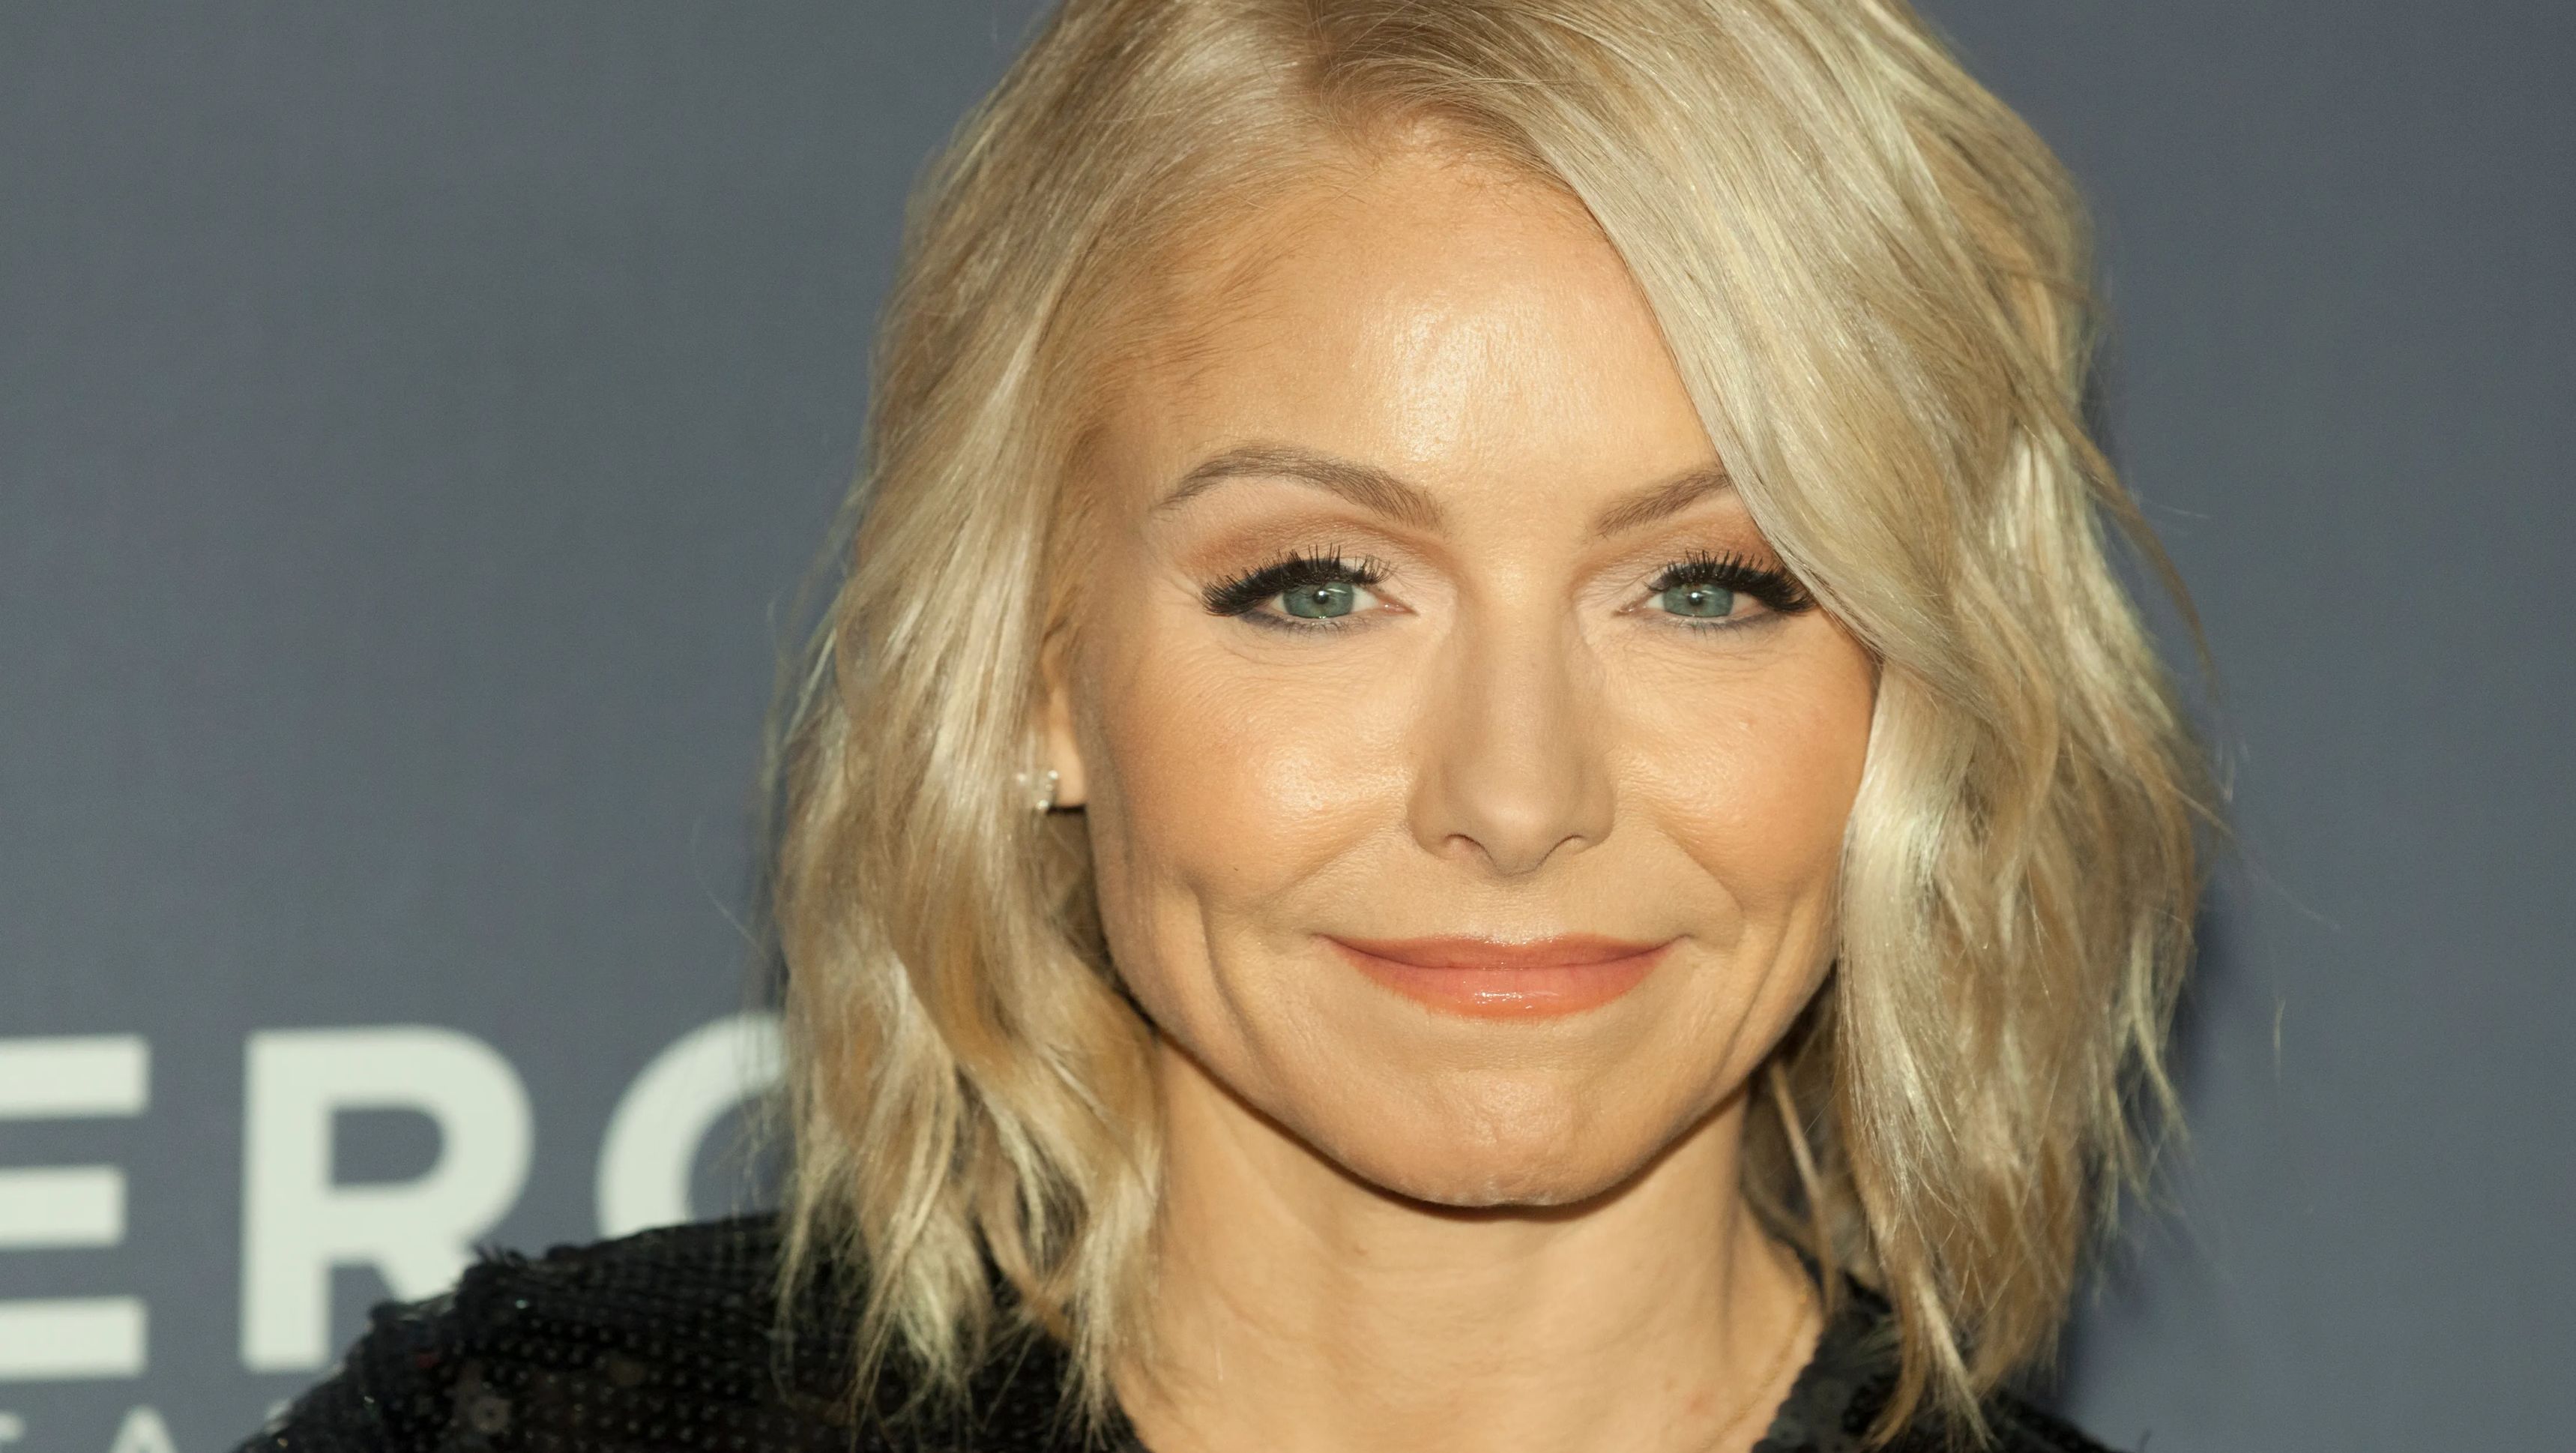 Close-up of a smiling Kelly Ripa wearing a black sequined dress at an event.